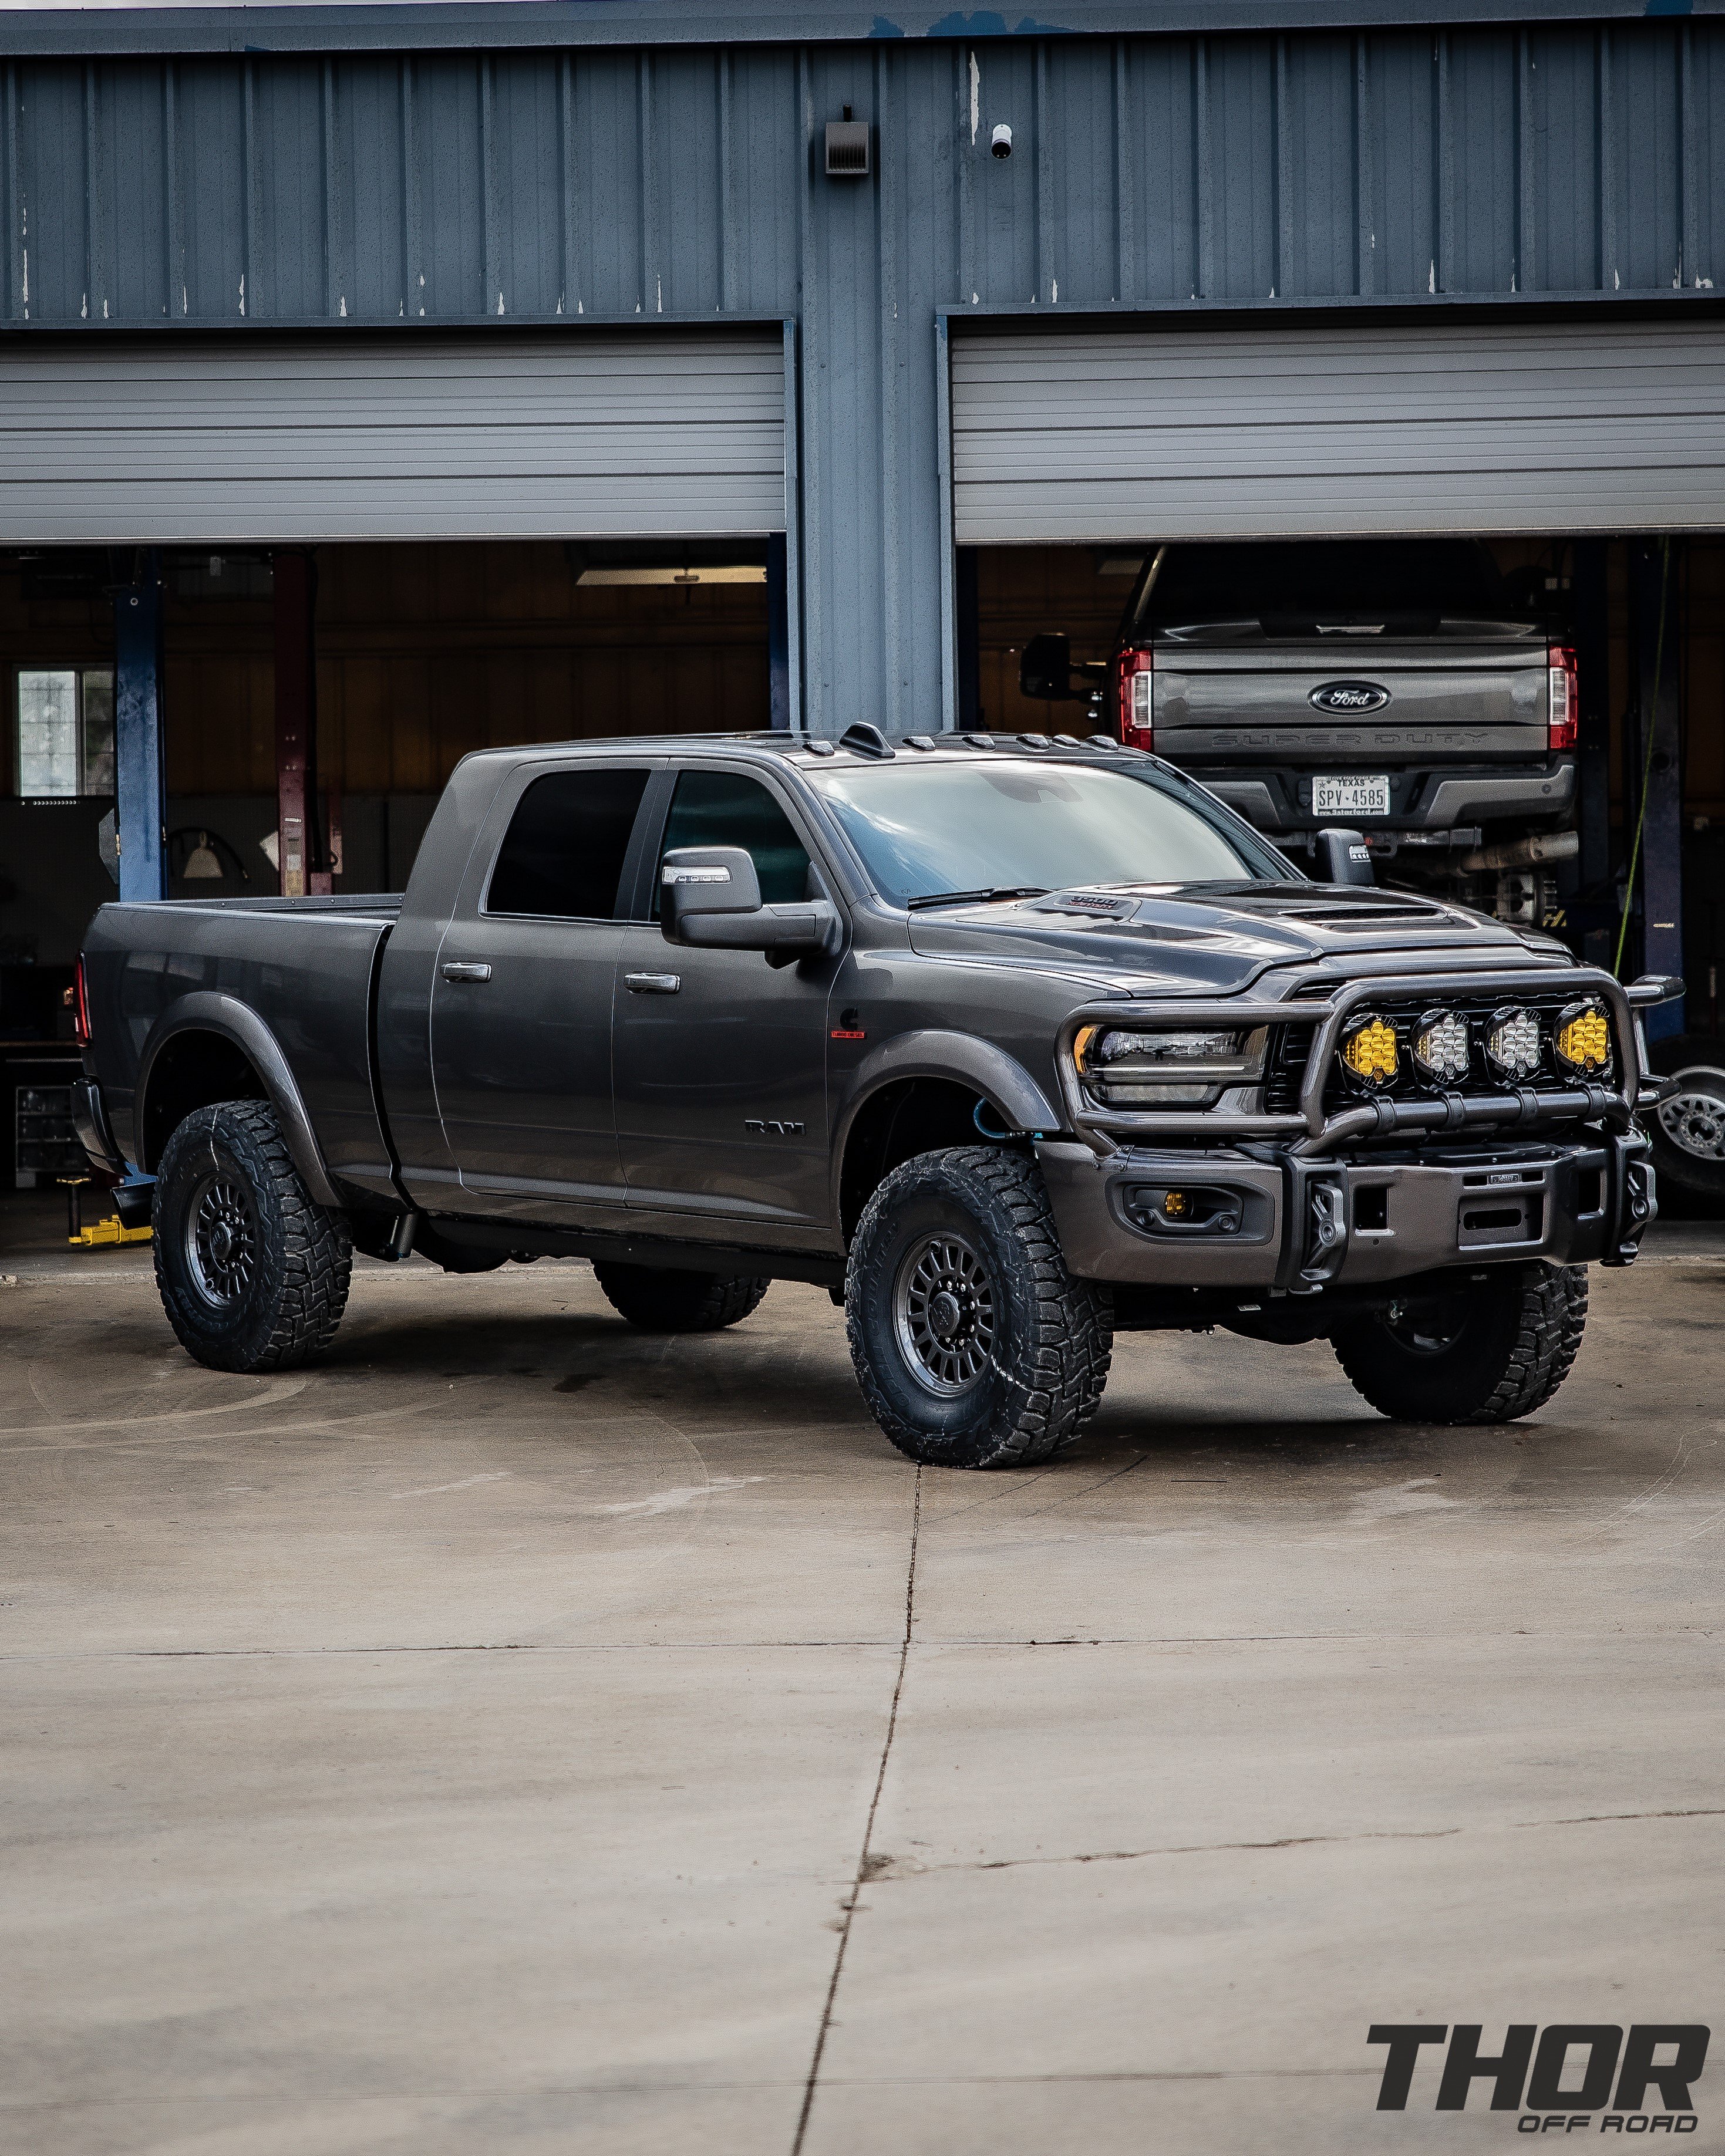 2023 RAM 3500 Limited in Grey with Carli 3.25" Pintop Suspension System, Carli Leaf Springs, Carli Torsion Sway Bar, Carli High Mount Steering Stabilizer, Carli Low Mount Steering Stabilizer, Carli Fabricated Radius Arms, AEV HD Low Tube Front Bumper, AEV 17"x8.5" Salta Onyx Wheels, 37x12.50R17 Toyo RT Tires, Smart Cap, Decked System, LP9 Clear Pro Driving Combo Lights, LP9 Amber Pro Driving Combo Lights, Baja Design Flush Mount Squadron Lights, Baja Design Fog Light Pocket Kit, BW Tow and Stow Hitch, Fender Flares, Titan XL 50 Gallon Fuel Tank, Valentine V2 Blend Mount, Magnaflow Exhaust